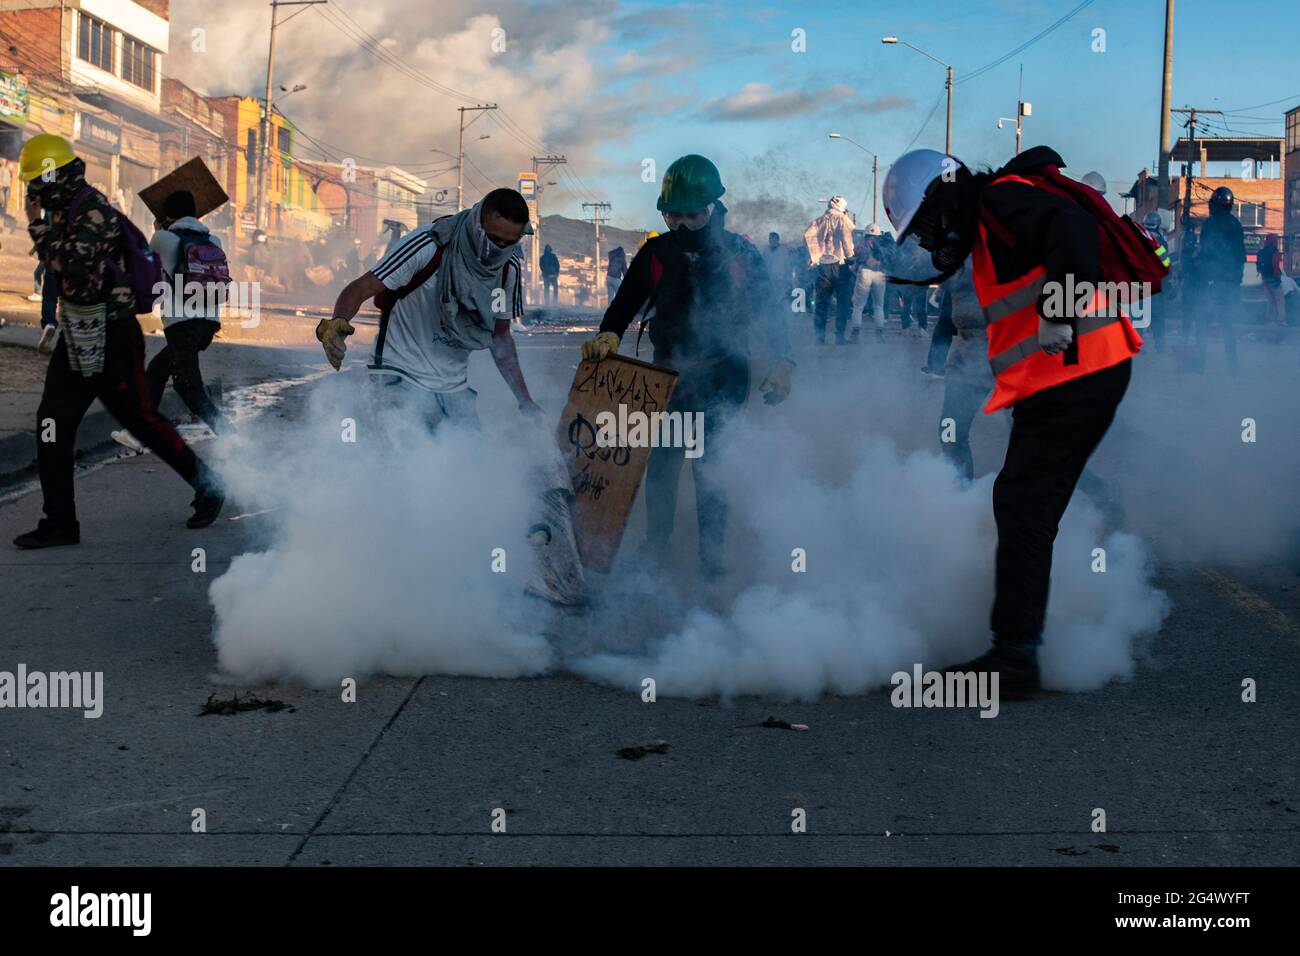 Bogota, Colombia. 21st June, 2021. A group of demonstrators mitigates a tear gas canister as clashes between demonstratros and Colombia's riot police erupt anti-government protest raise in Bogota Colombia against the government of president Ivan Duque, inequalities and abuse of authority by police. Credit: Long Visual Press/Alamy Live News Stock Photo